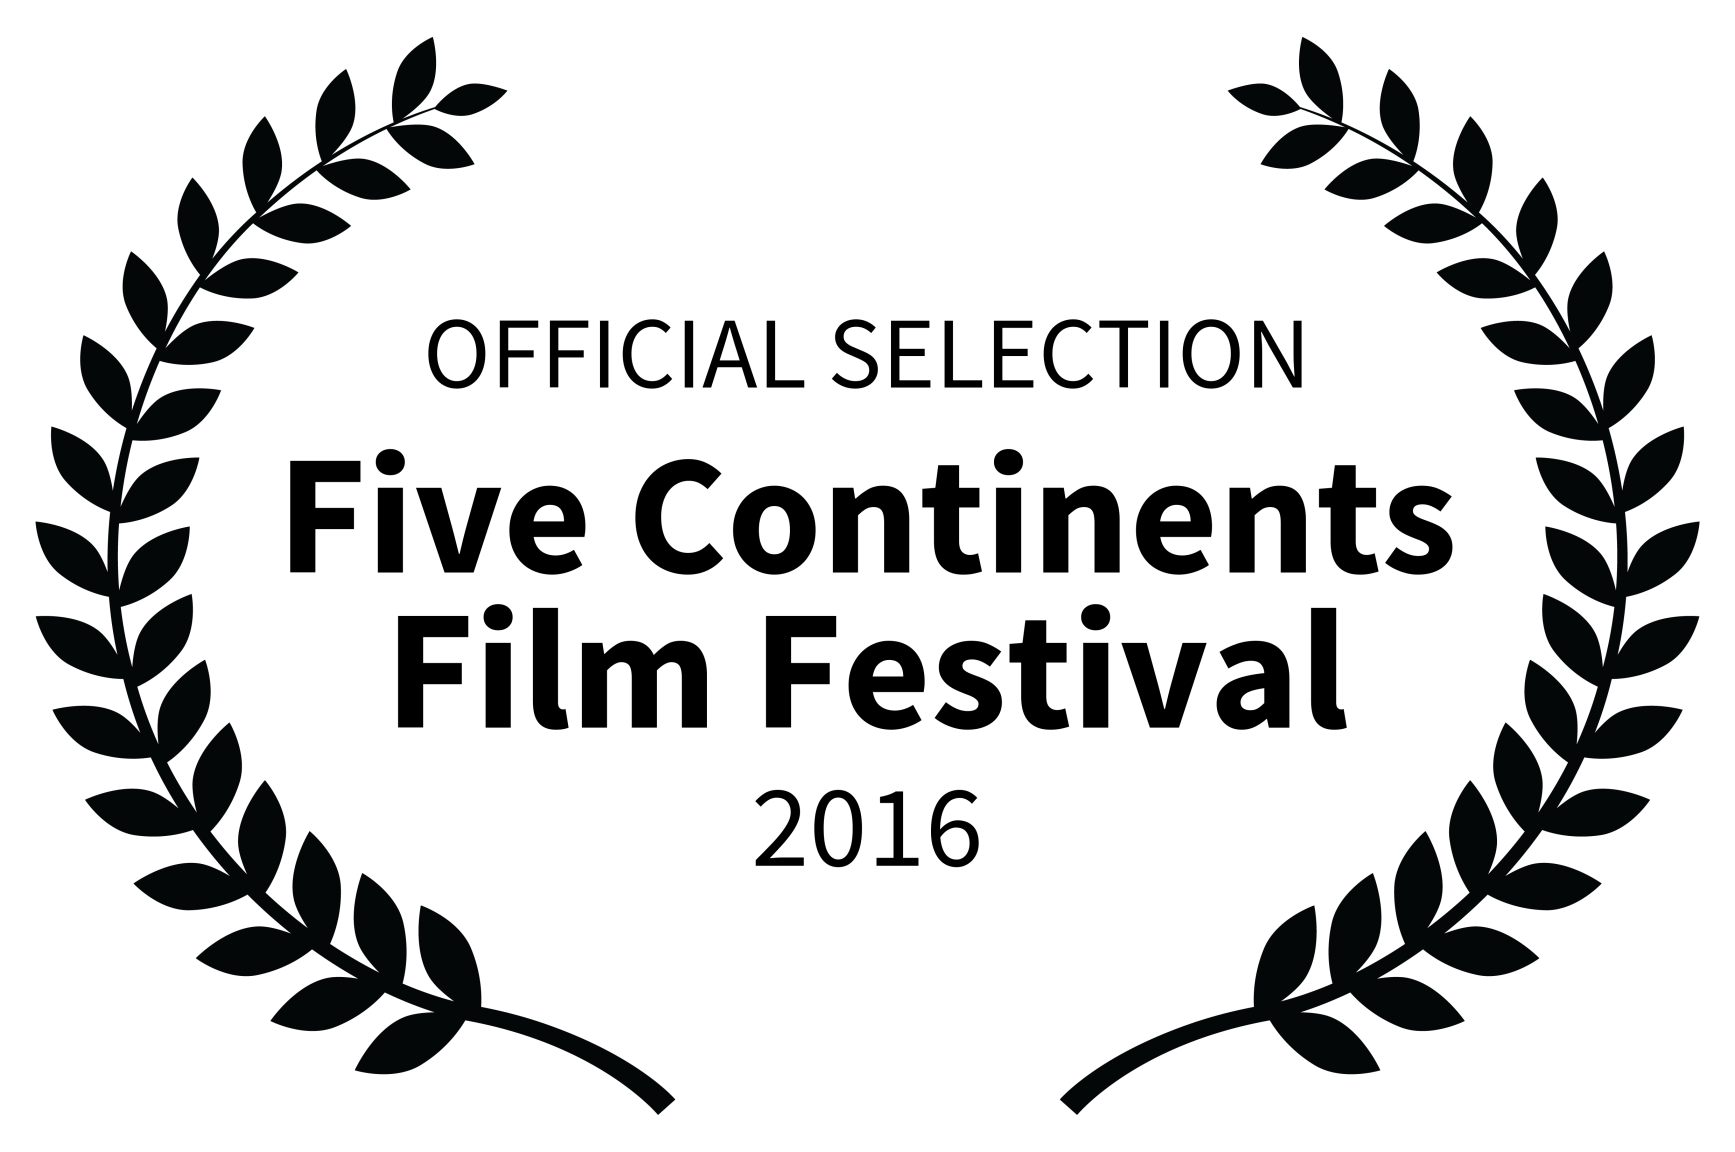 OFFICIAL SELECTION - Five Continents Film Festival - 2016